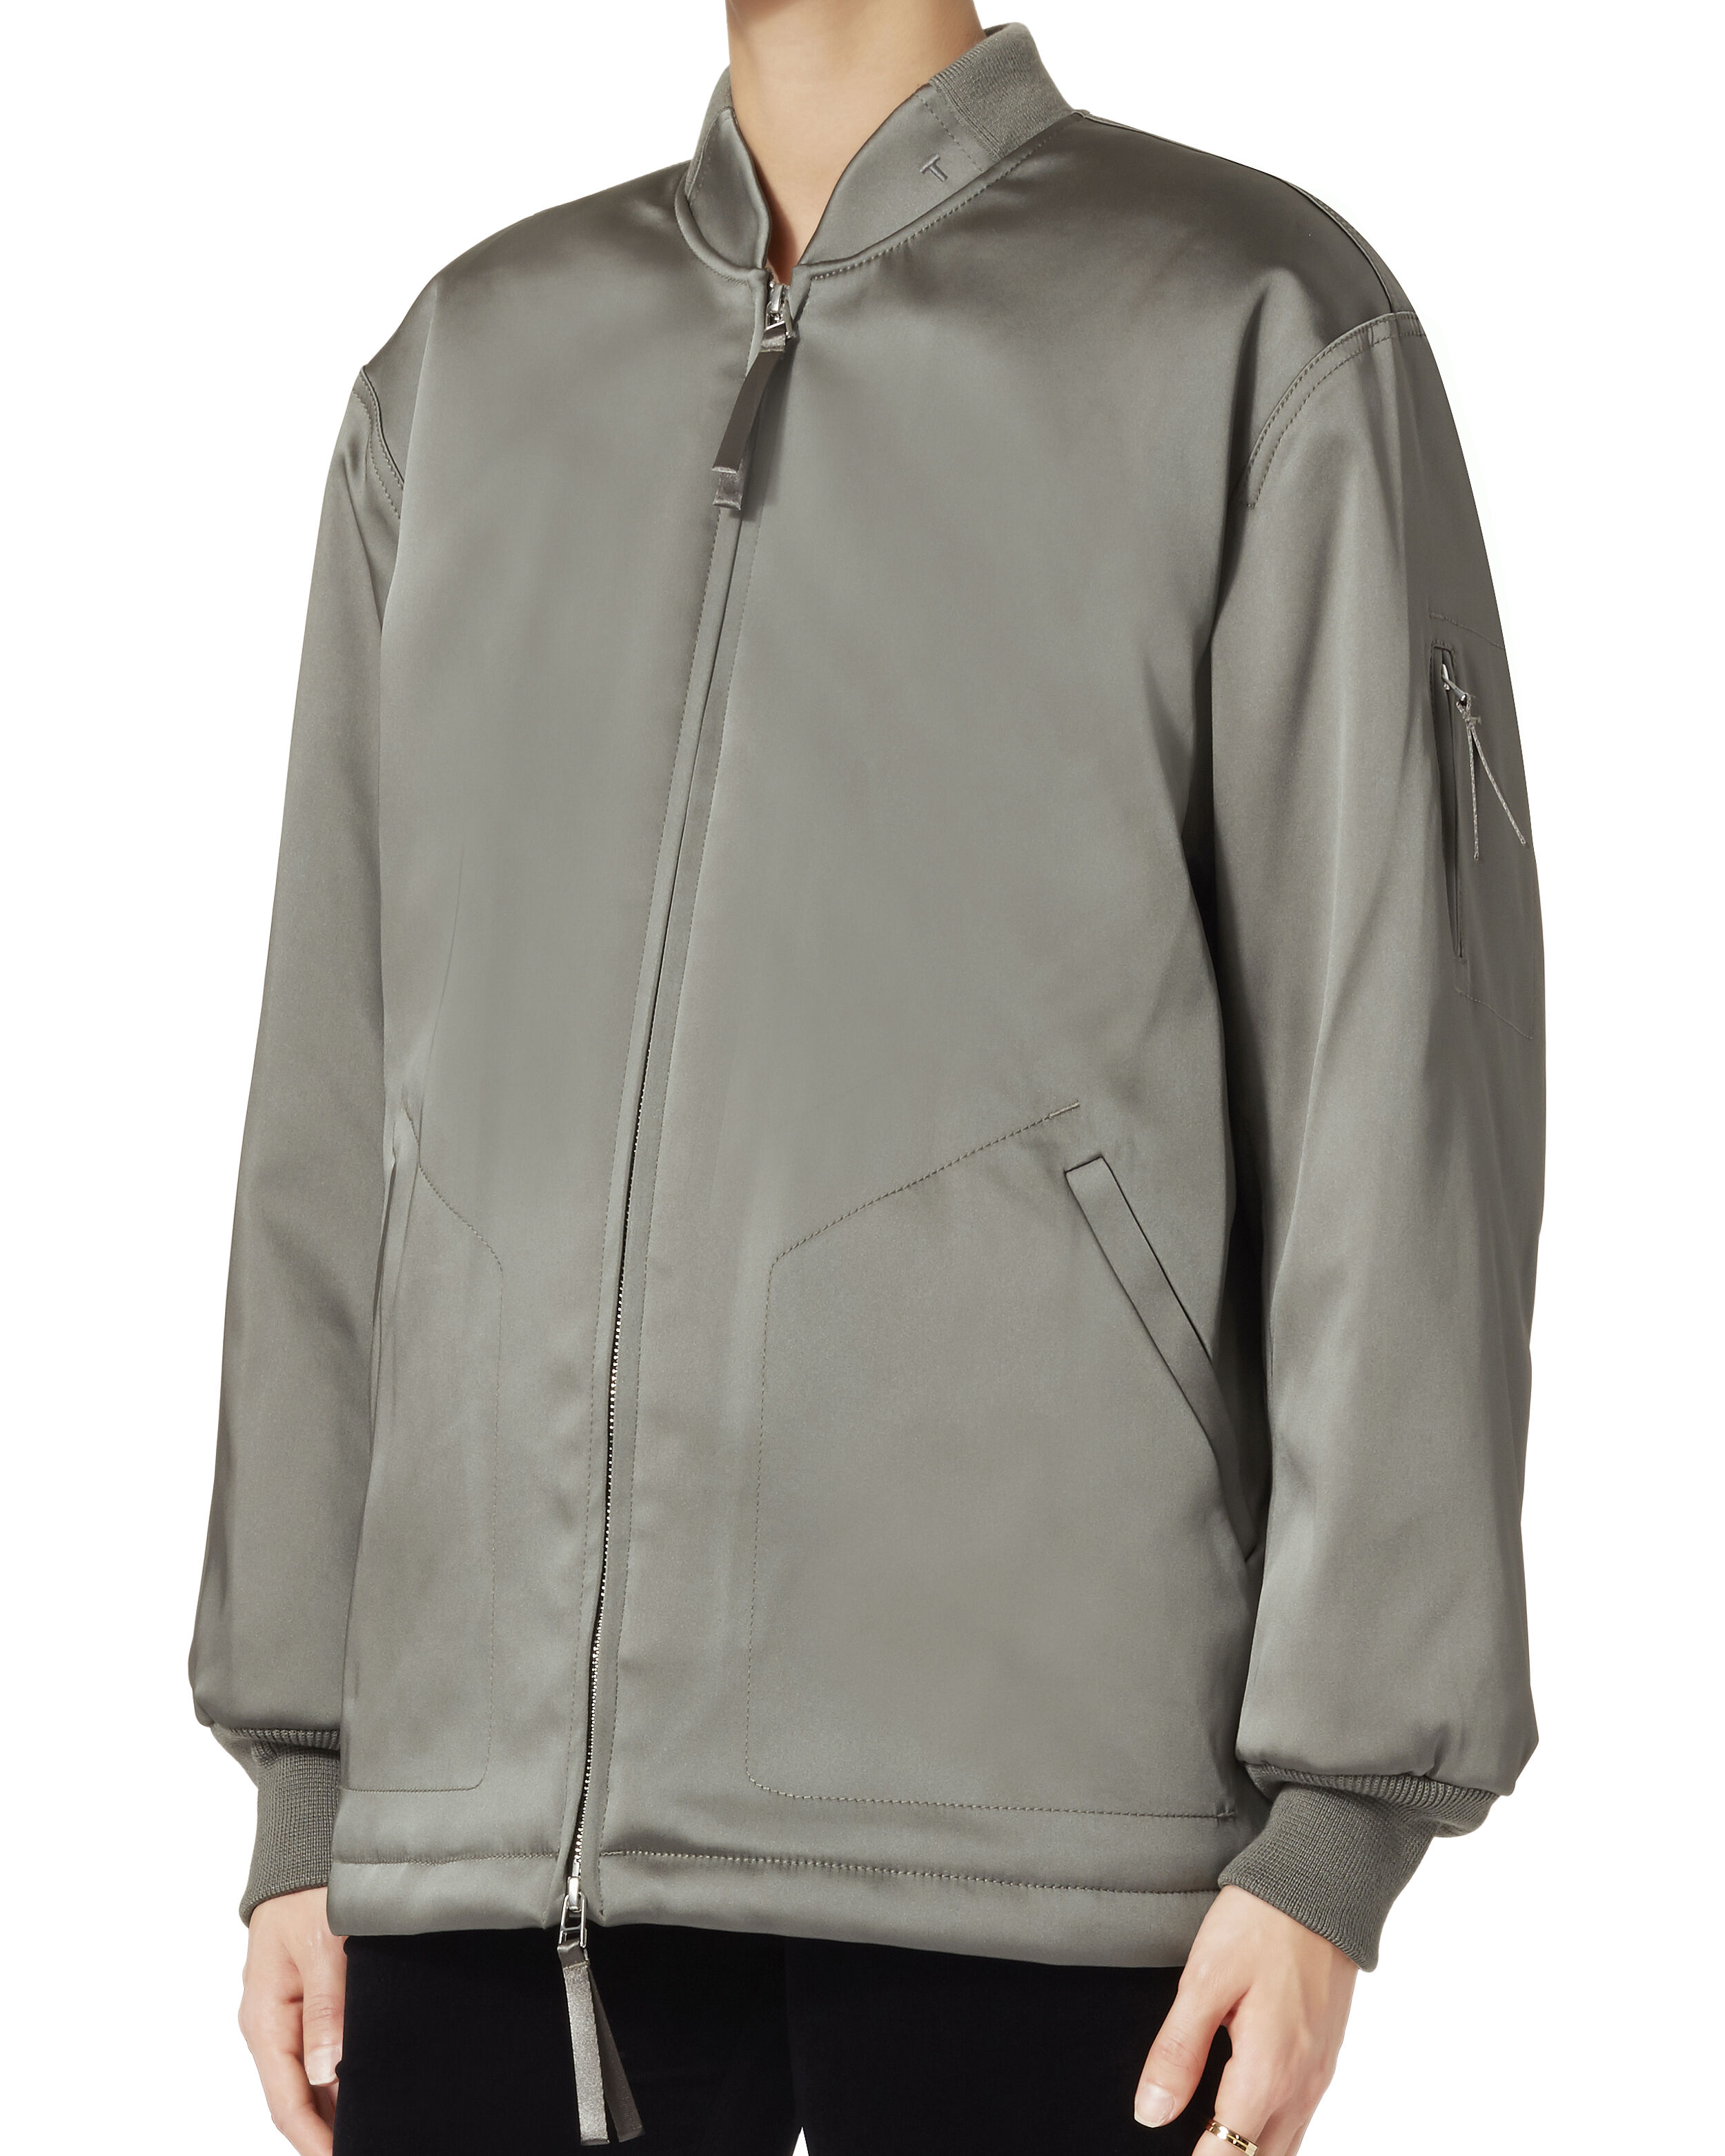 T by Alexander Wang Water Resistant Bomber Jacket - INTERMIX®